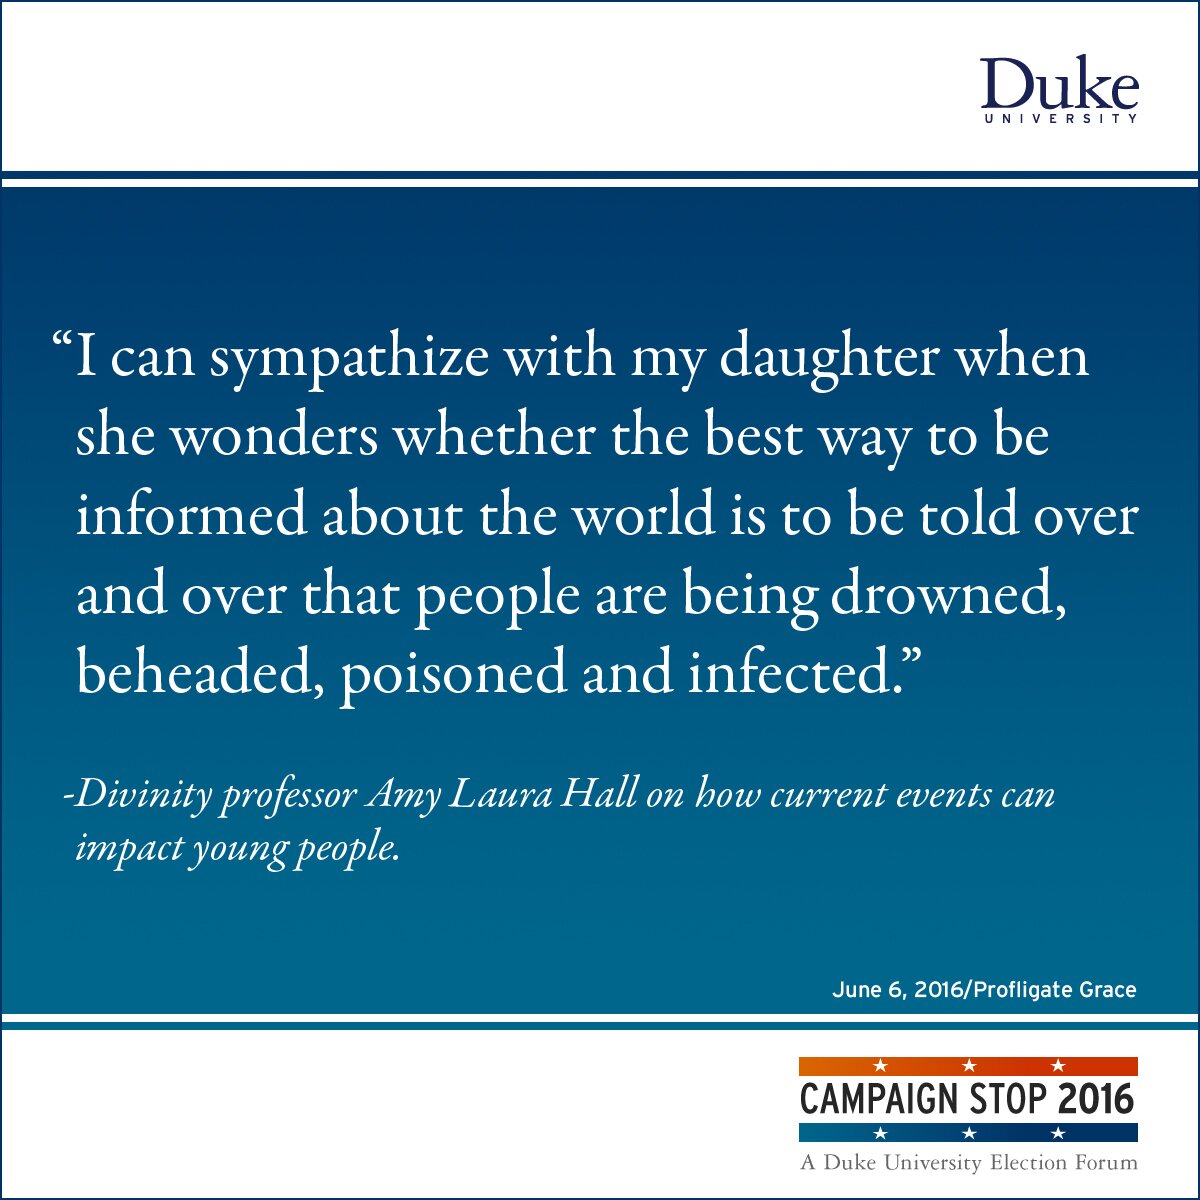 “I can sympathize with my daughter when she wonders whether the best way to be informed about the world is to be told over and over that people are being drowned, beheaded, poisoned and infected.” -Divinity professor Amy Laura Hall on how current events can impact young people.